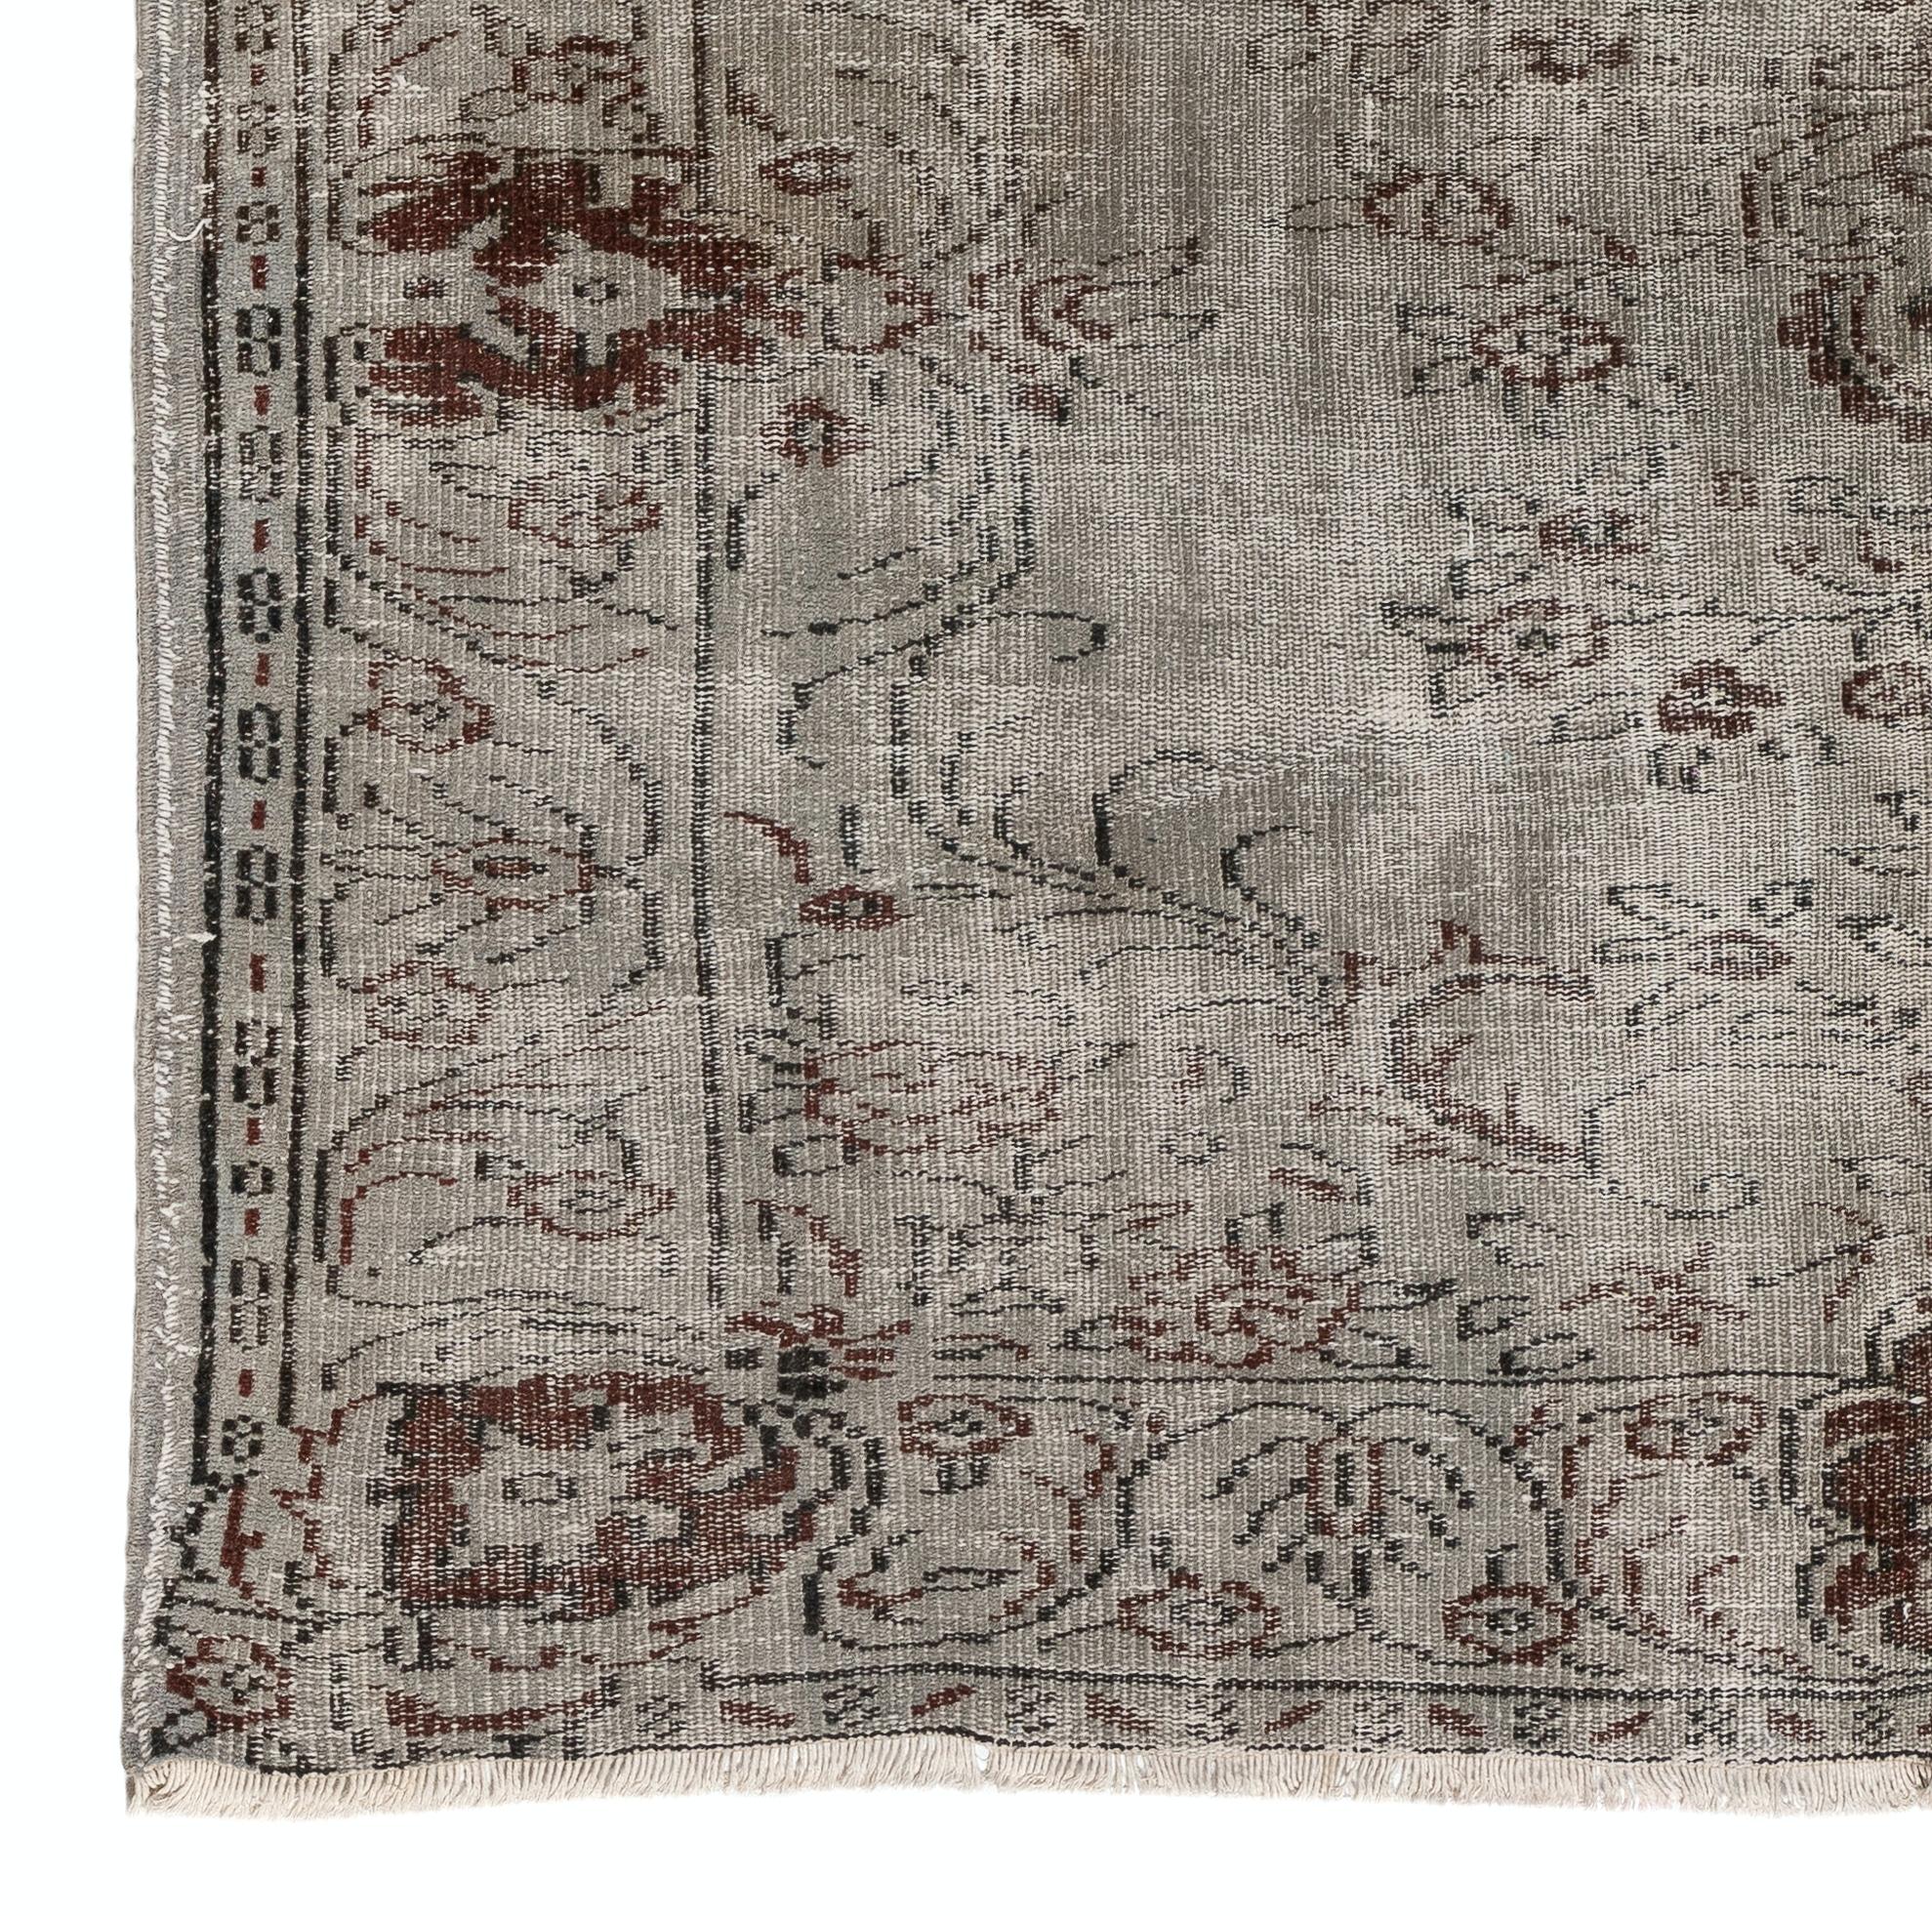 Hand-Woven 6.3x9 ft Vintage Handmade Turkish Area Rug in Gray with Floral Medallion Design For Sale